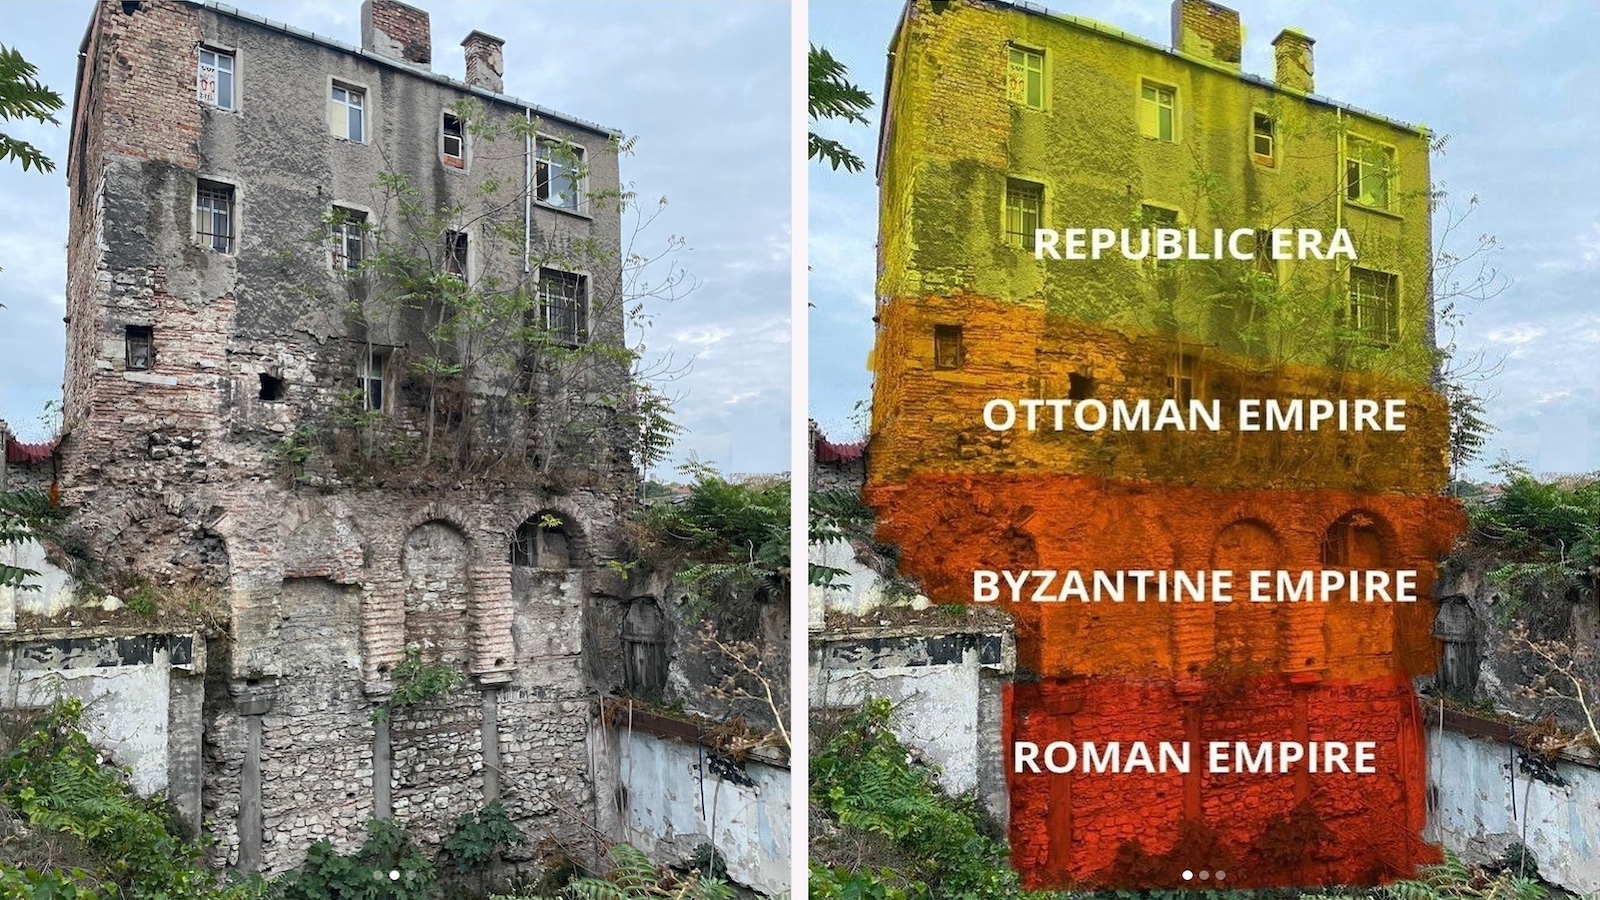 An old building with visible sections from four eras labeled: "REPUBLIC ERA," "OTTOMAN EMPIRE," "BYZANTINE EMPIRE," and "ROMAN EMPIRE" from top to bottom. Left side shows the building; right side shows the labeled eras.